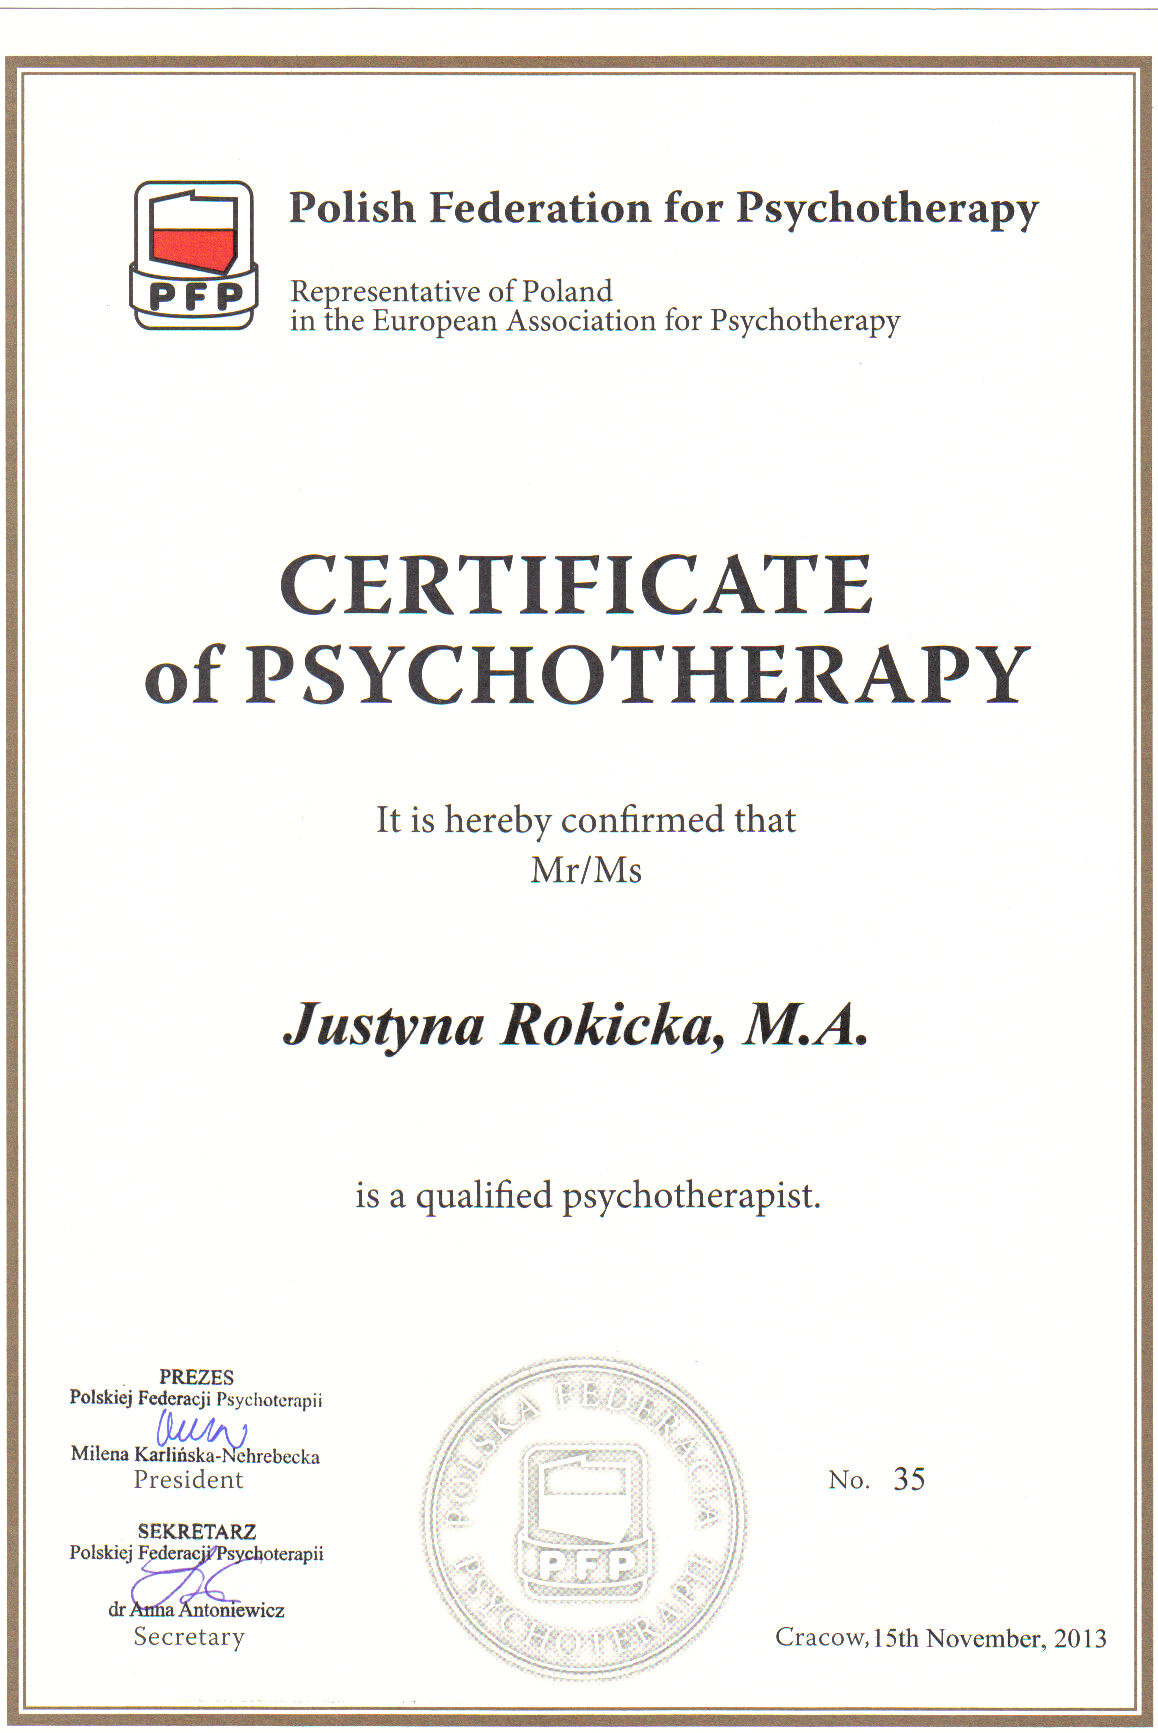 The European Certificate of Psychotherapy